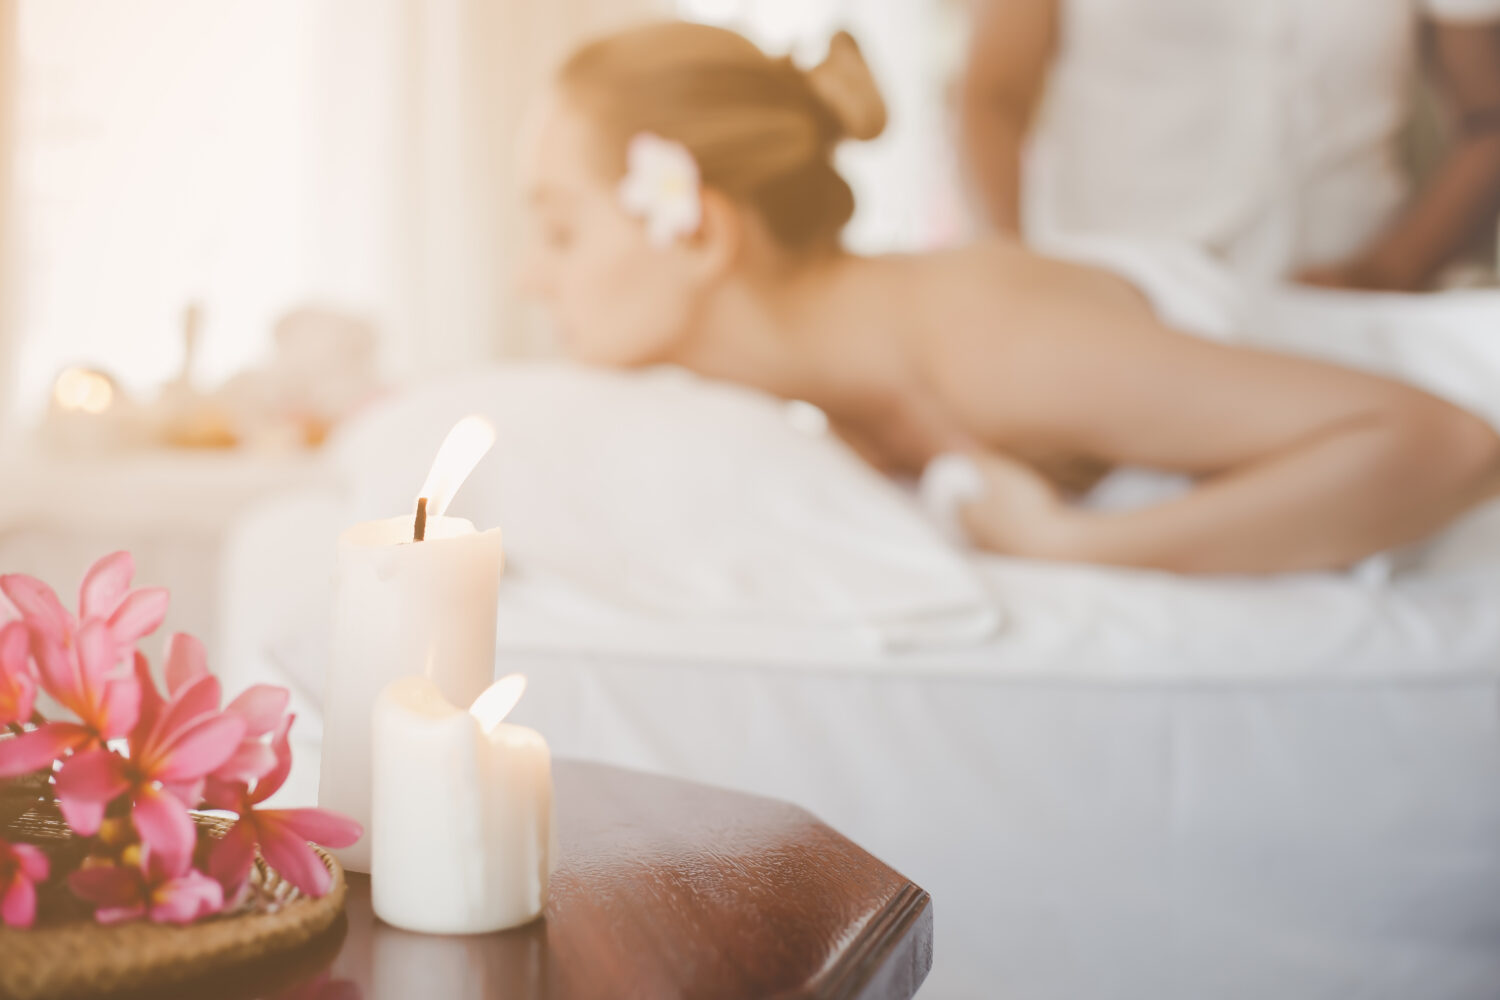 foreground candles on a table and a woman getting a massage in the background